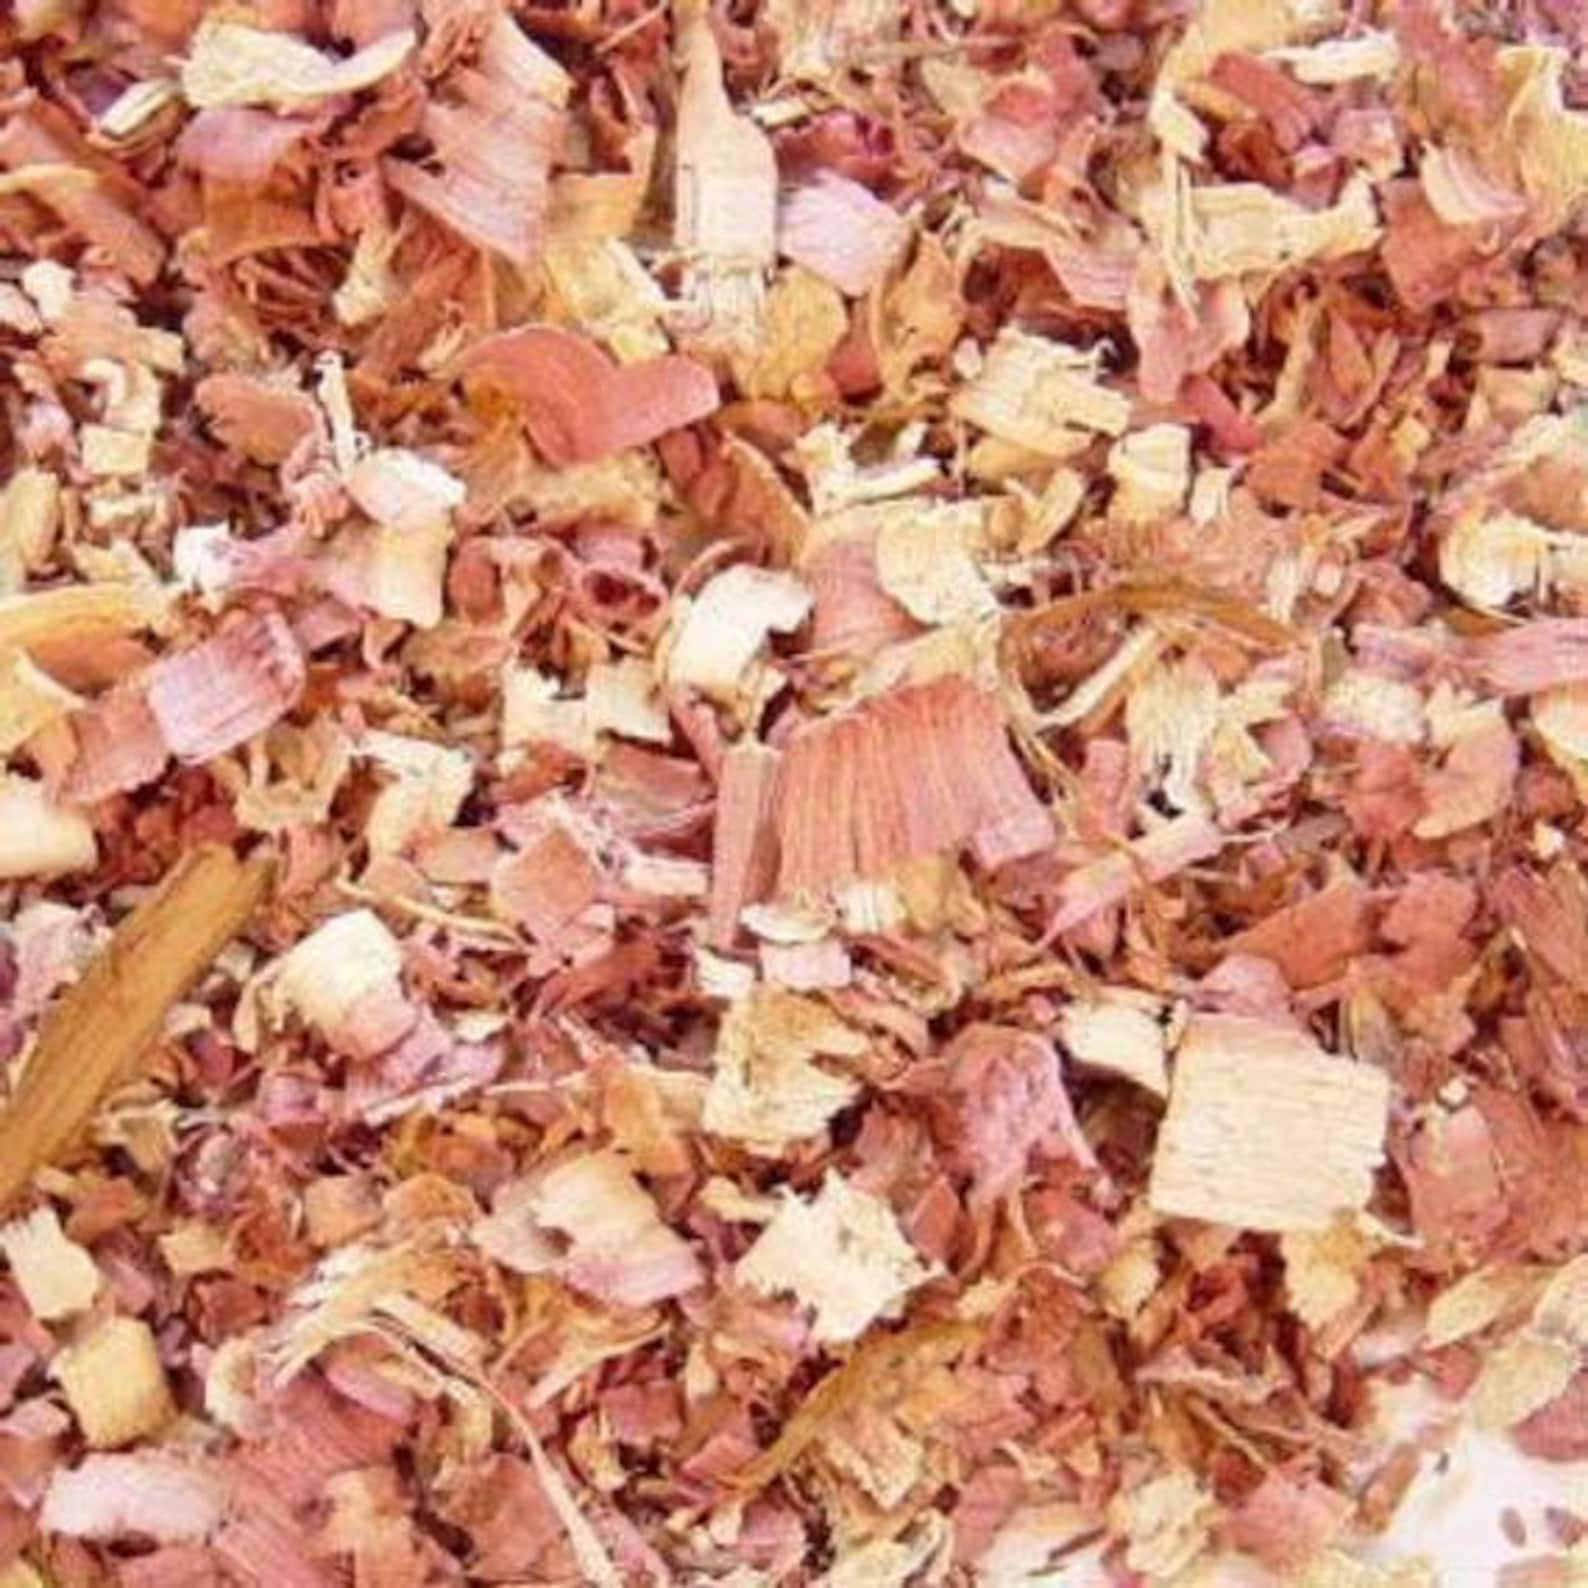 Aromatic Red Cedar Fine Wood Shavings Raw Material For Etsy